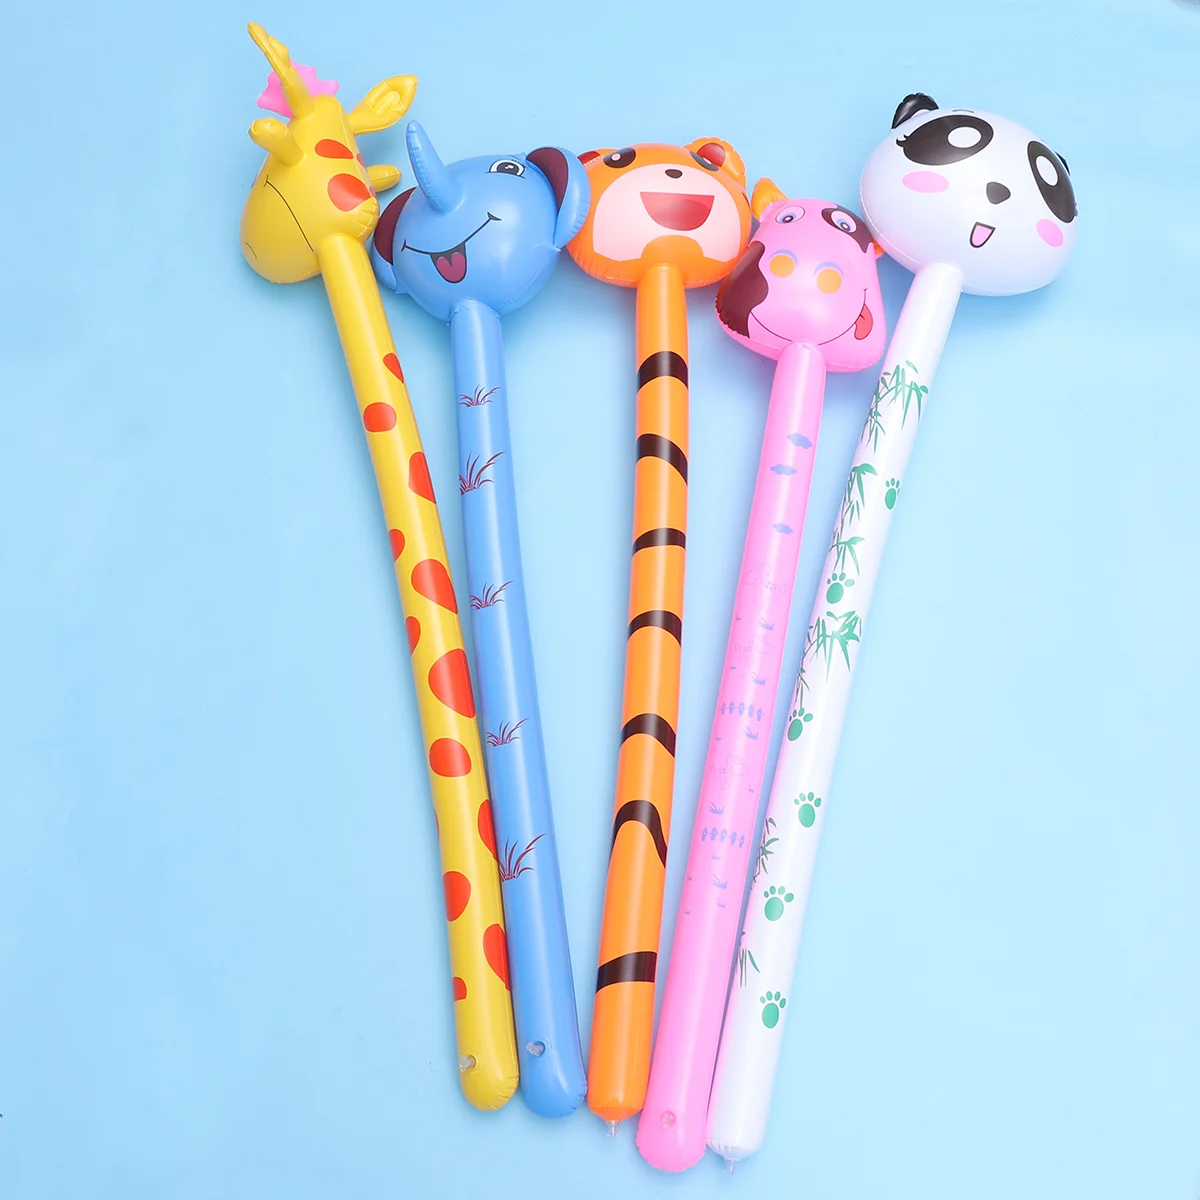 

Inflatable Animal Toy Photo Propskids Balloon Party Favors Zoo Inflatables Jungle Animals Balloons Toys